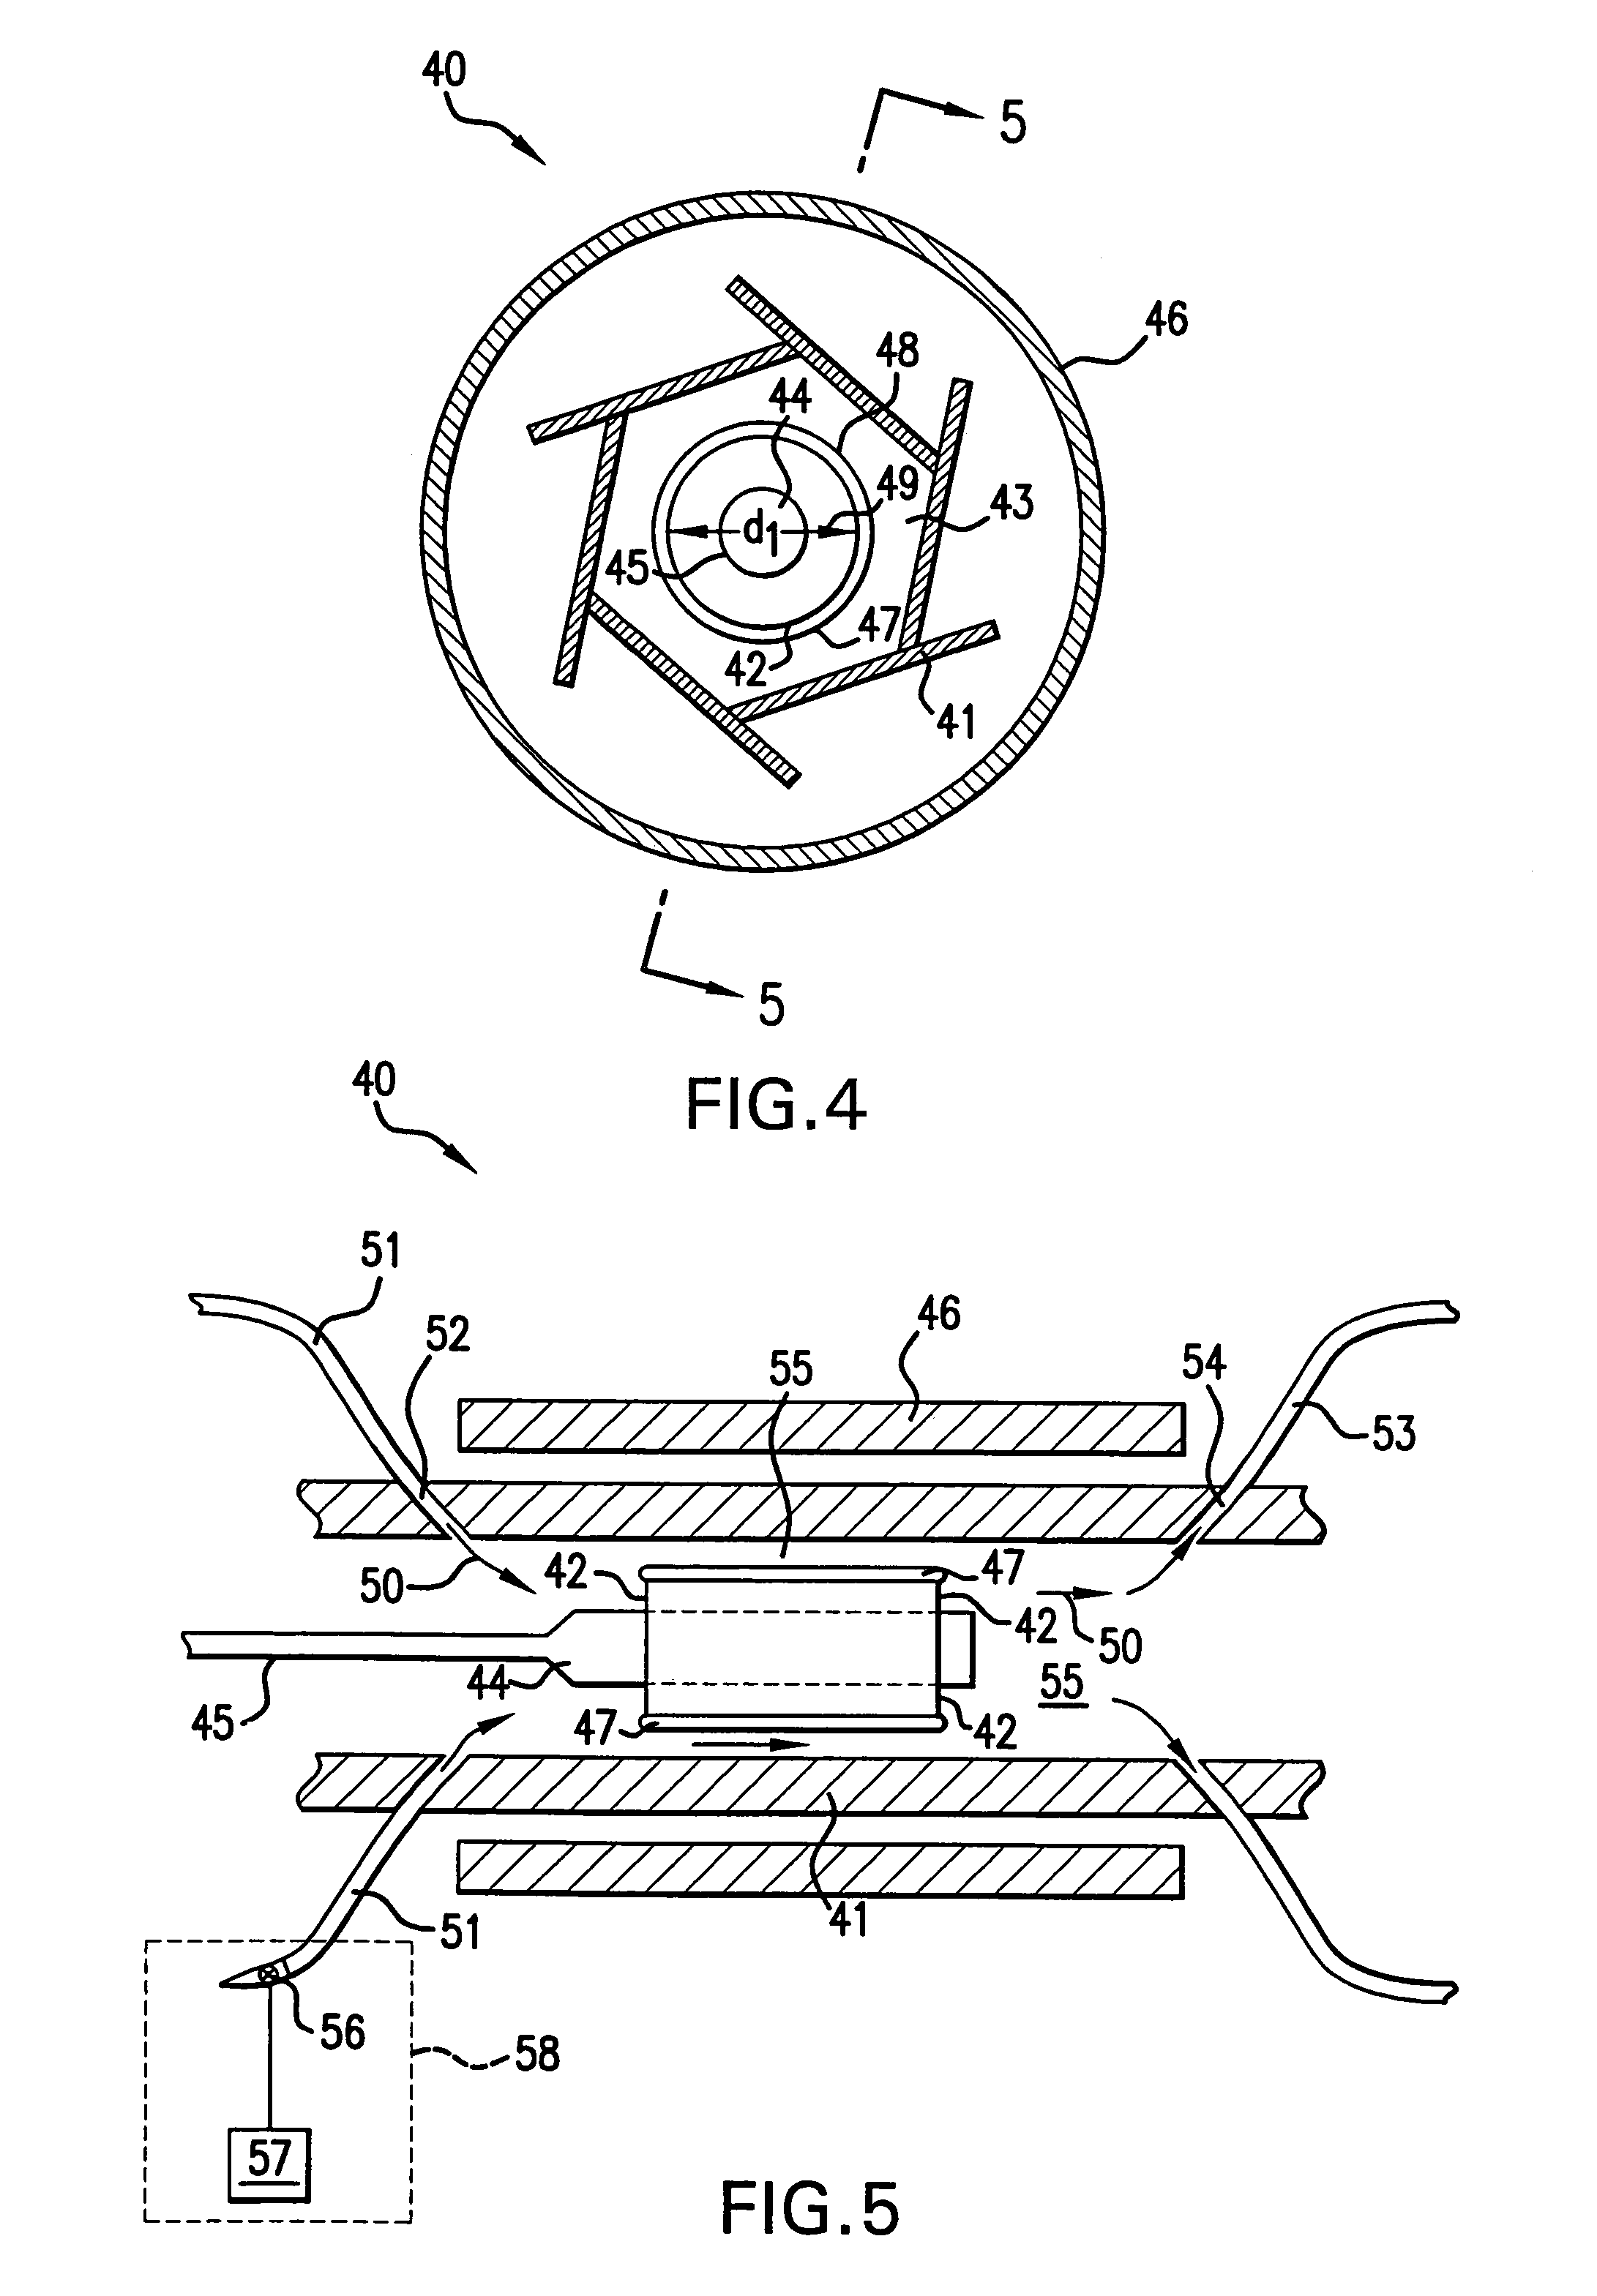 Thermal regulation of a coated work-piece during the reconfiguration of the coated work-piece